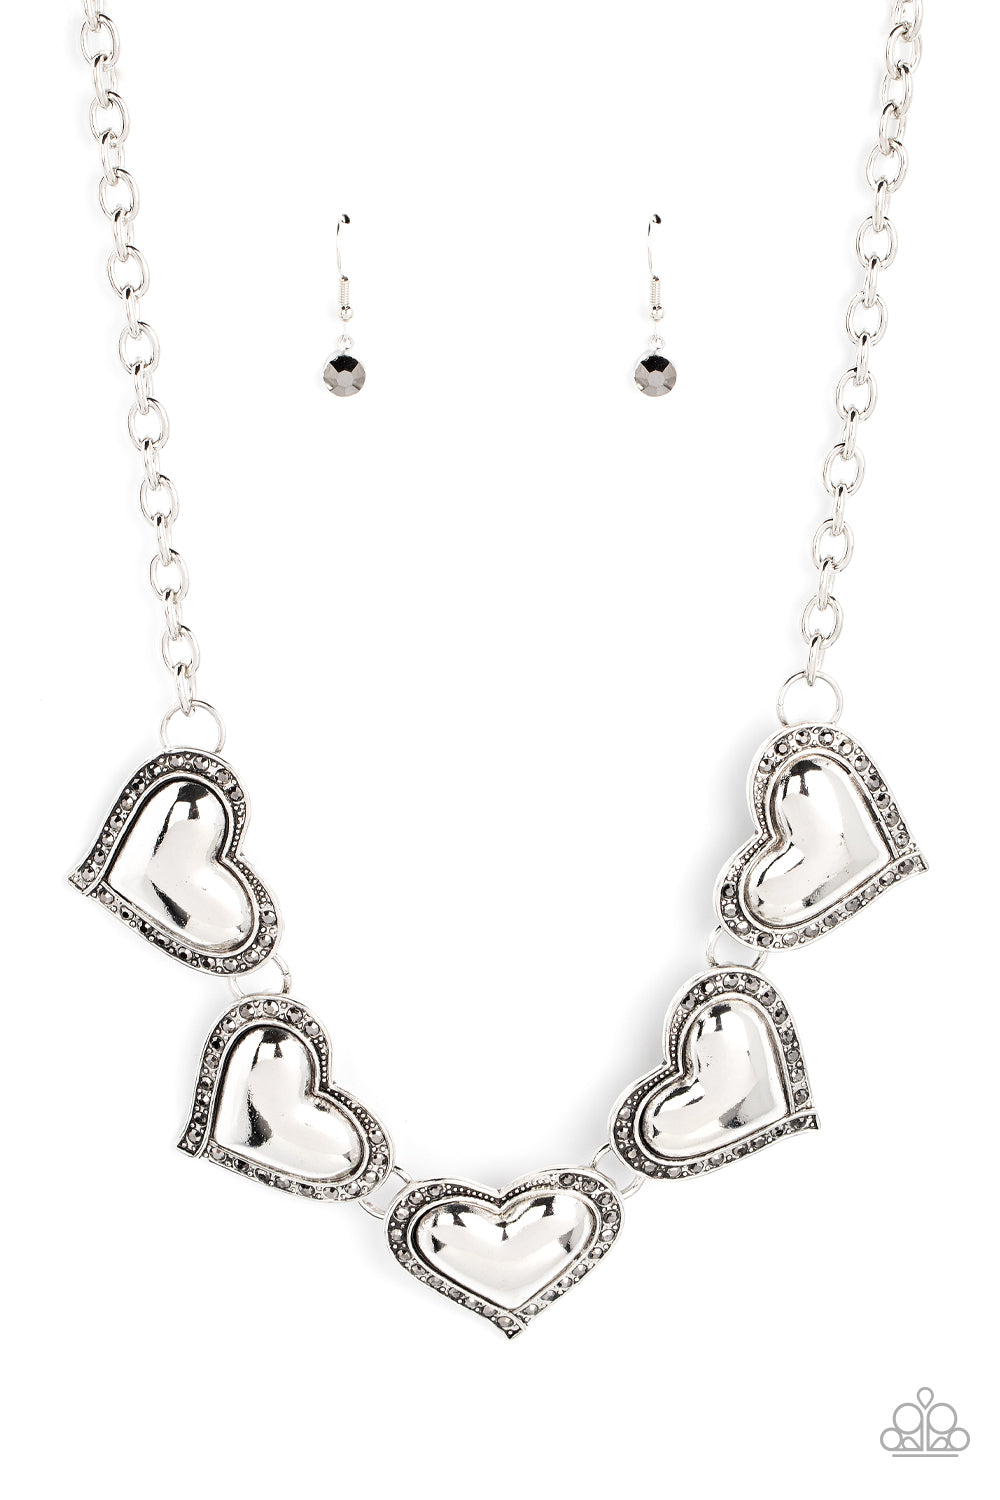 Paparazzi ♥ Kindred Hearts - Silver ♥ Necklace